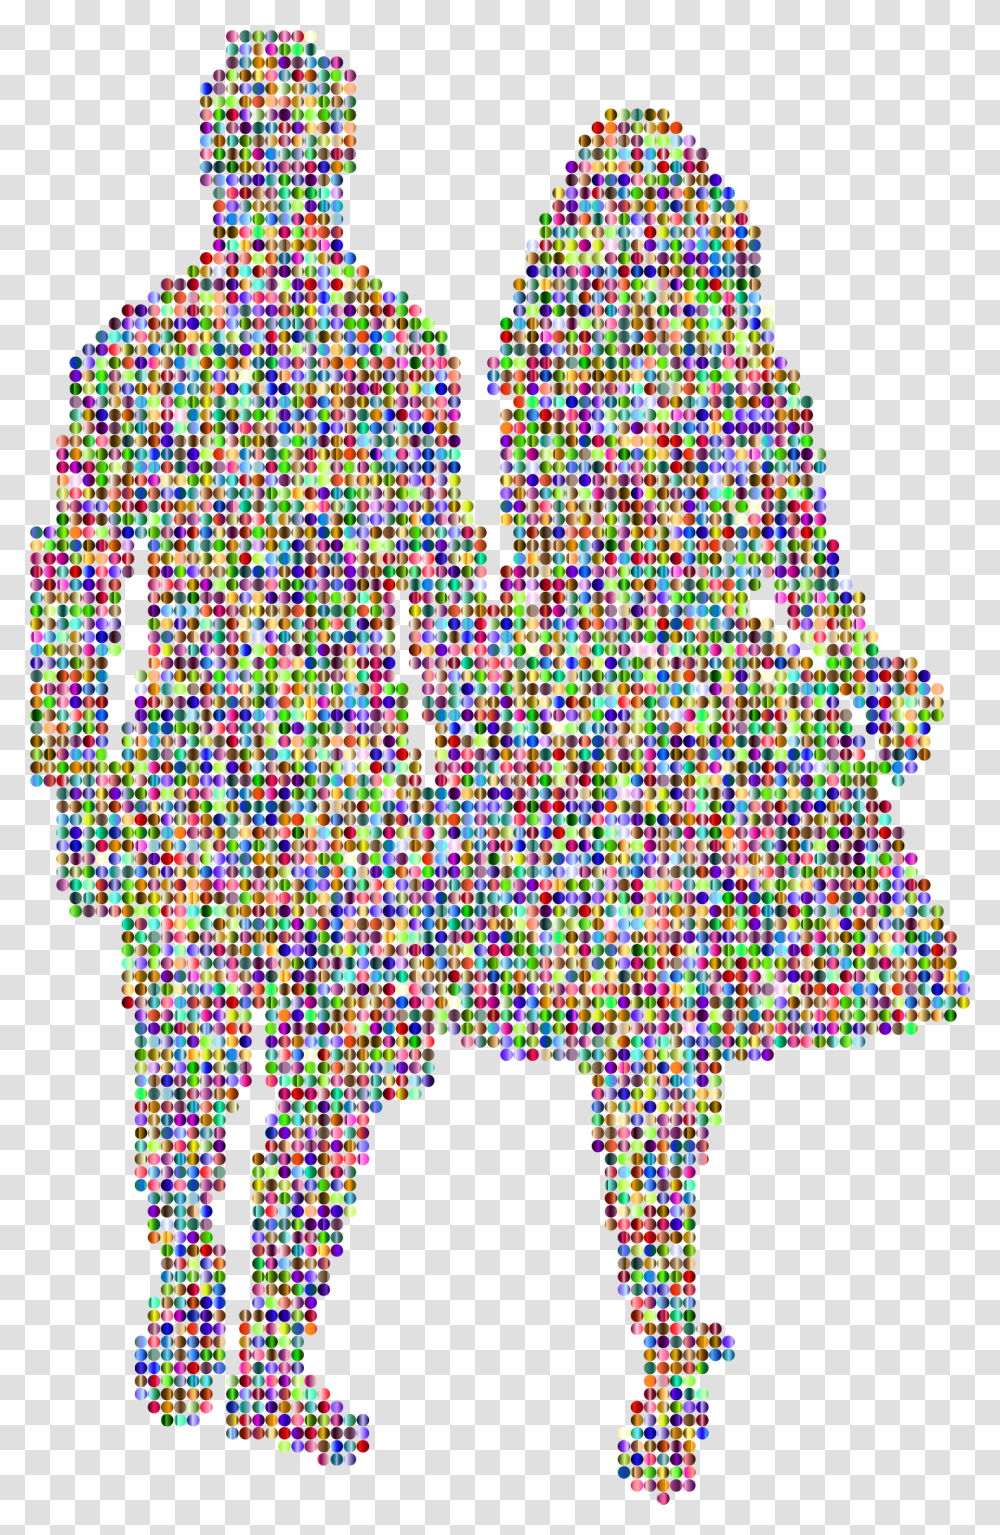 Prismatic Couple Holding Hands Silhouette 4 Clip Arts Couple Holding Hands Silhouette Clipart Transparent Png